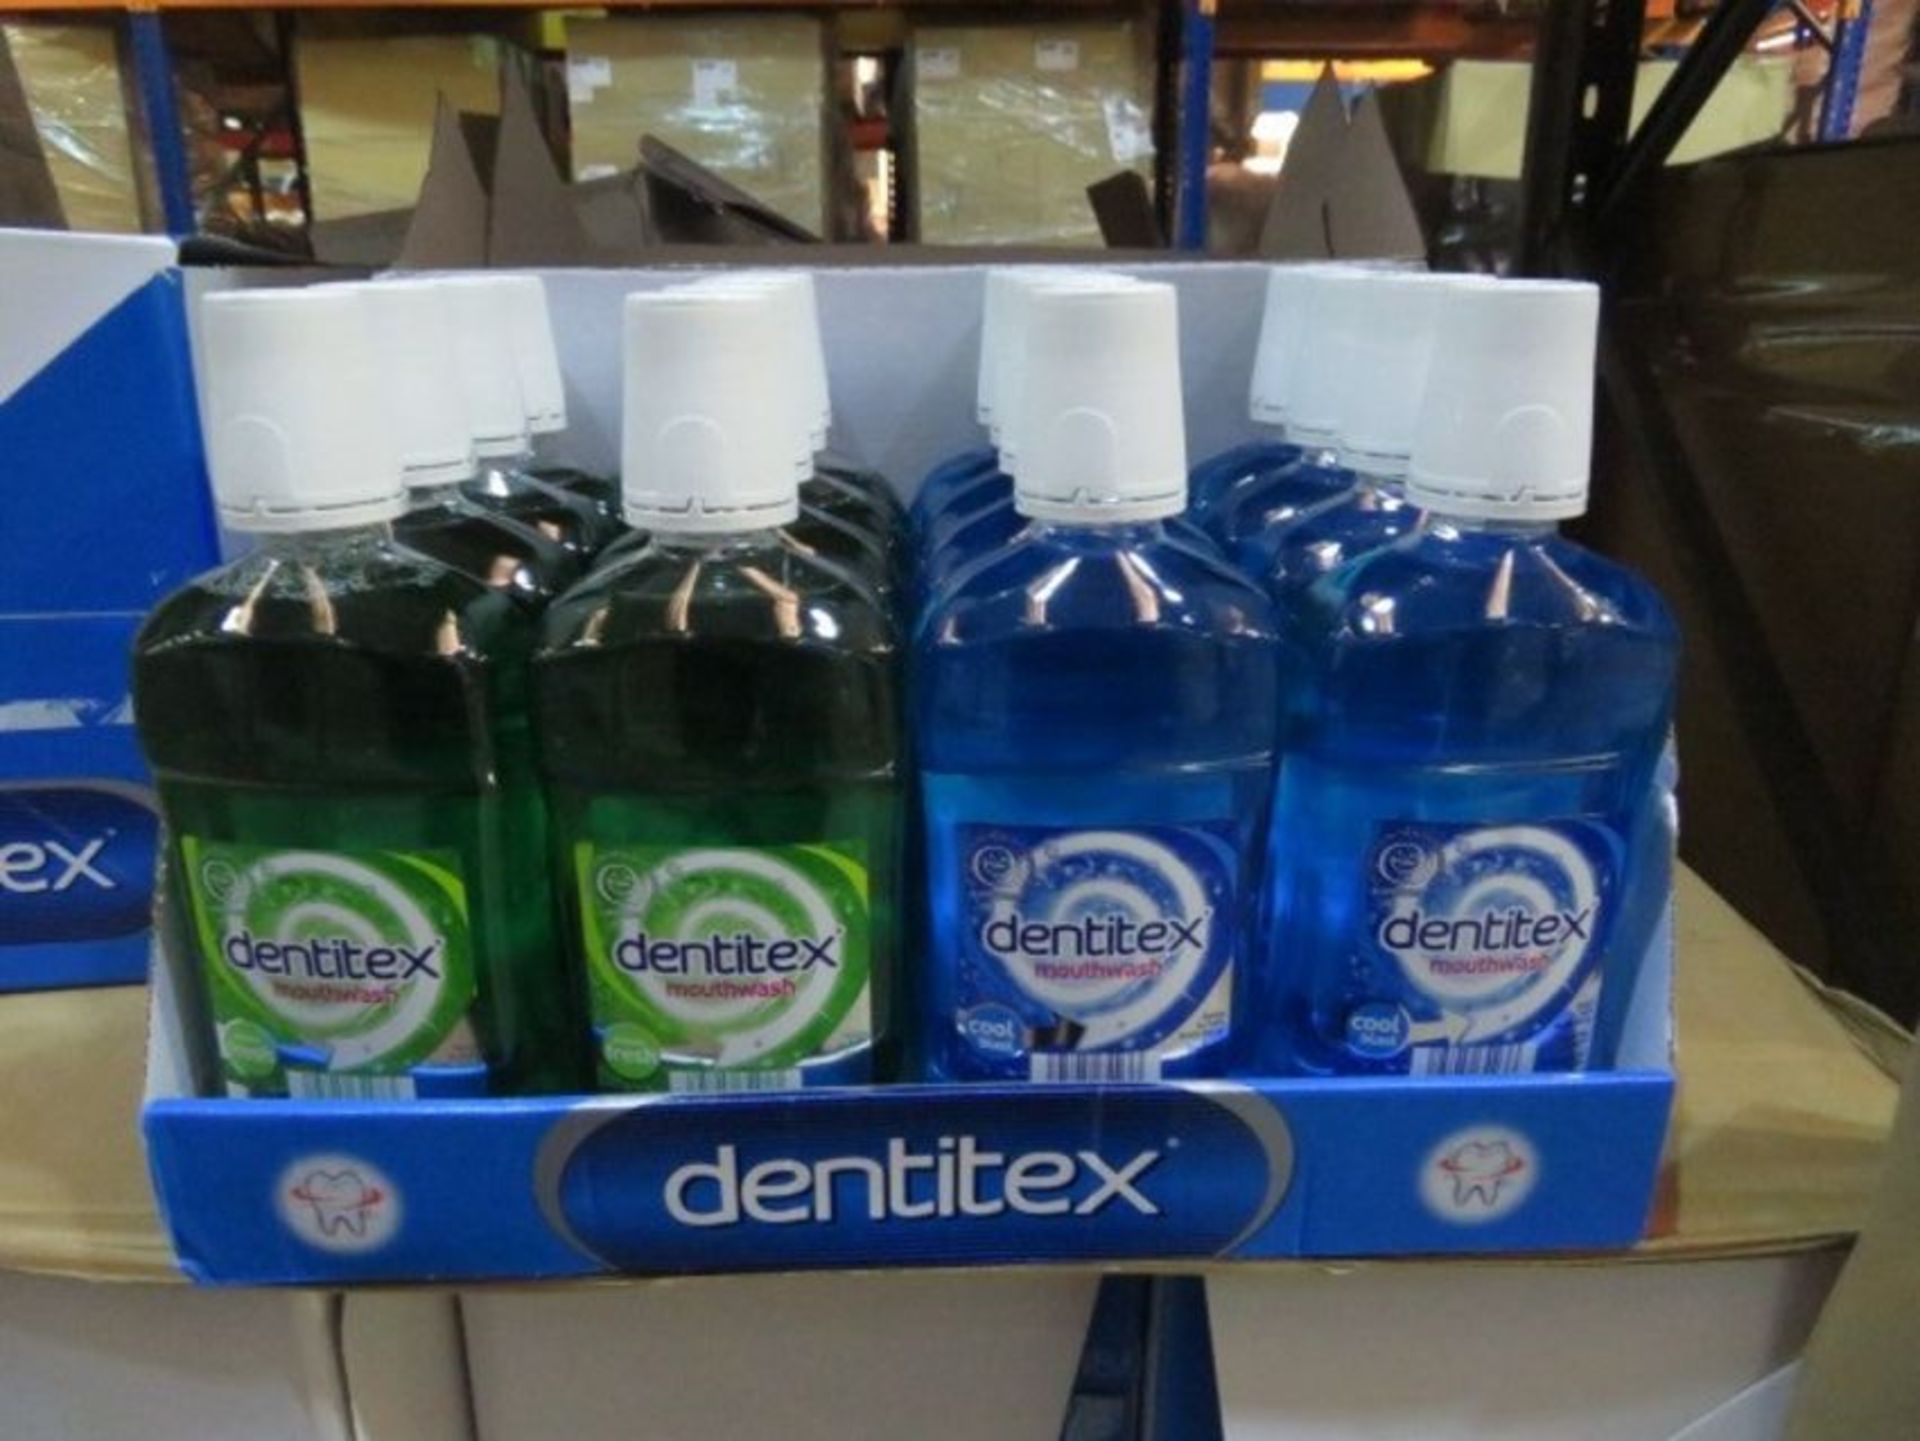 1 x PALLET OF BRANDED MOUTHWASH. 72 BOXES OF 16 UNITS. 2 DIFFERENT FLAVOURS. 1,152 UNITS IN TOTAL